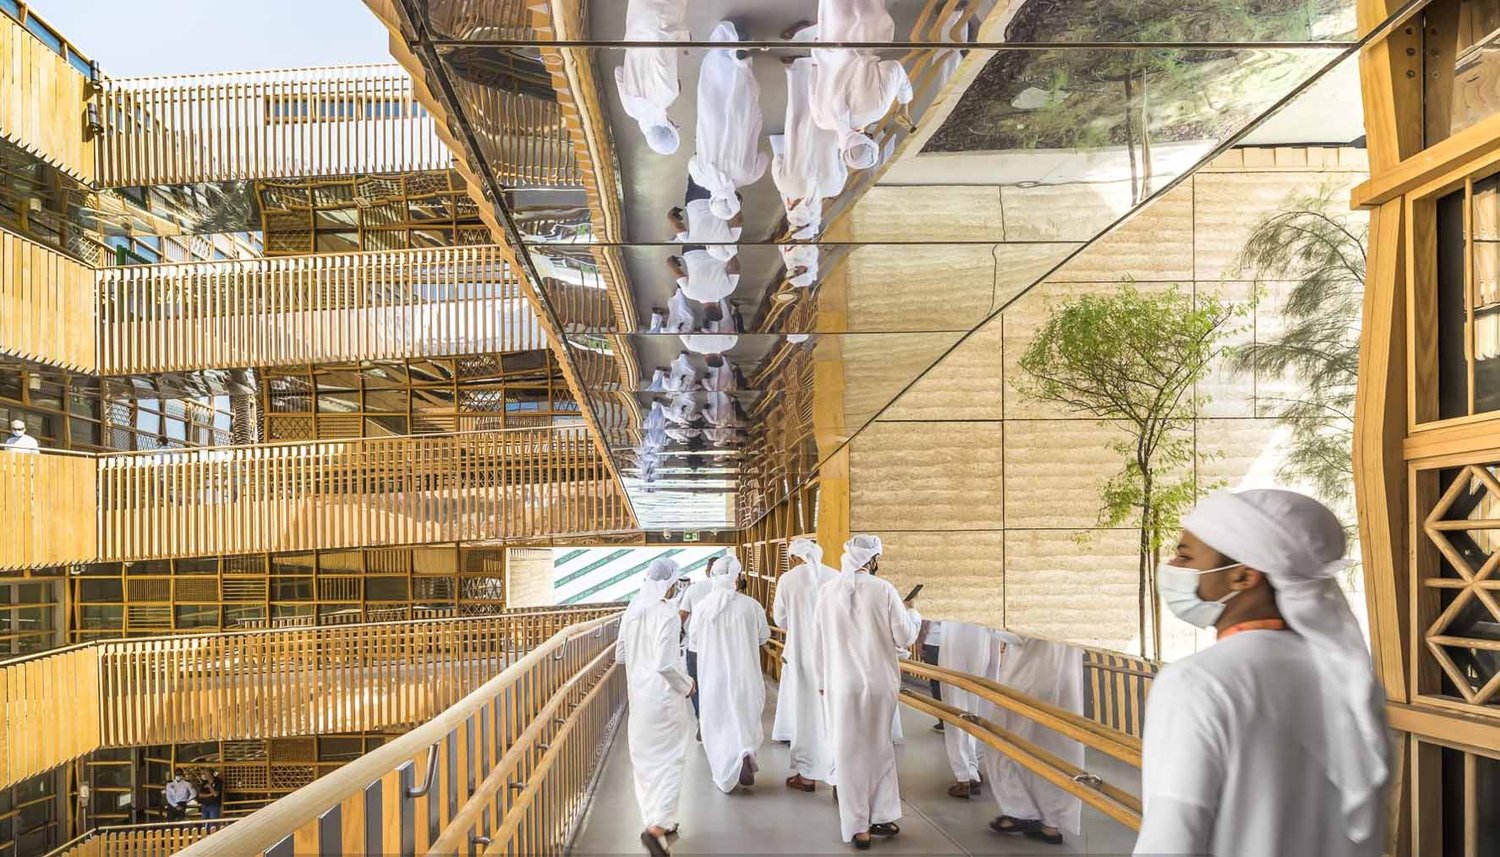 The french and moroccan pavilions at EXPO 2020 Dubai